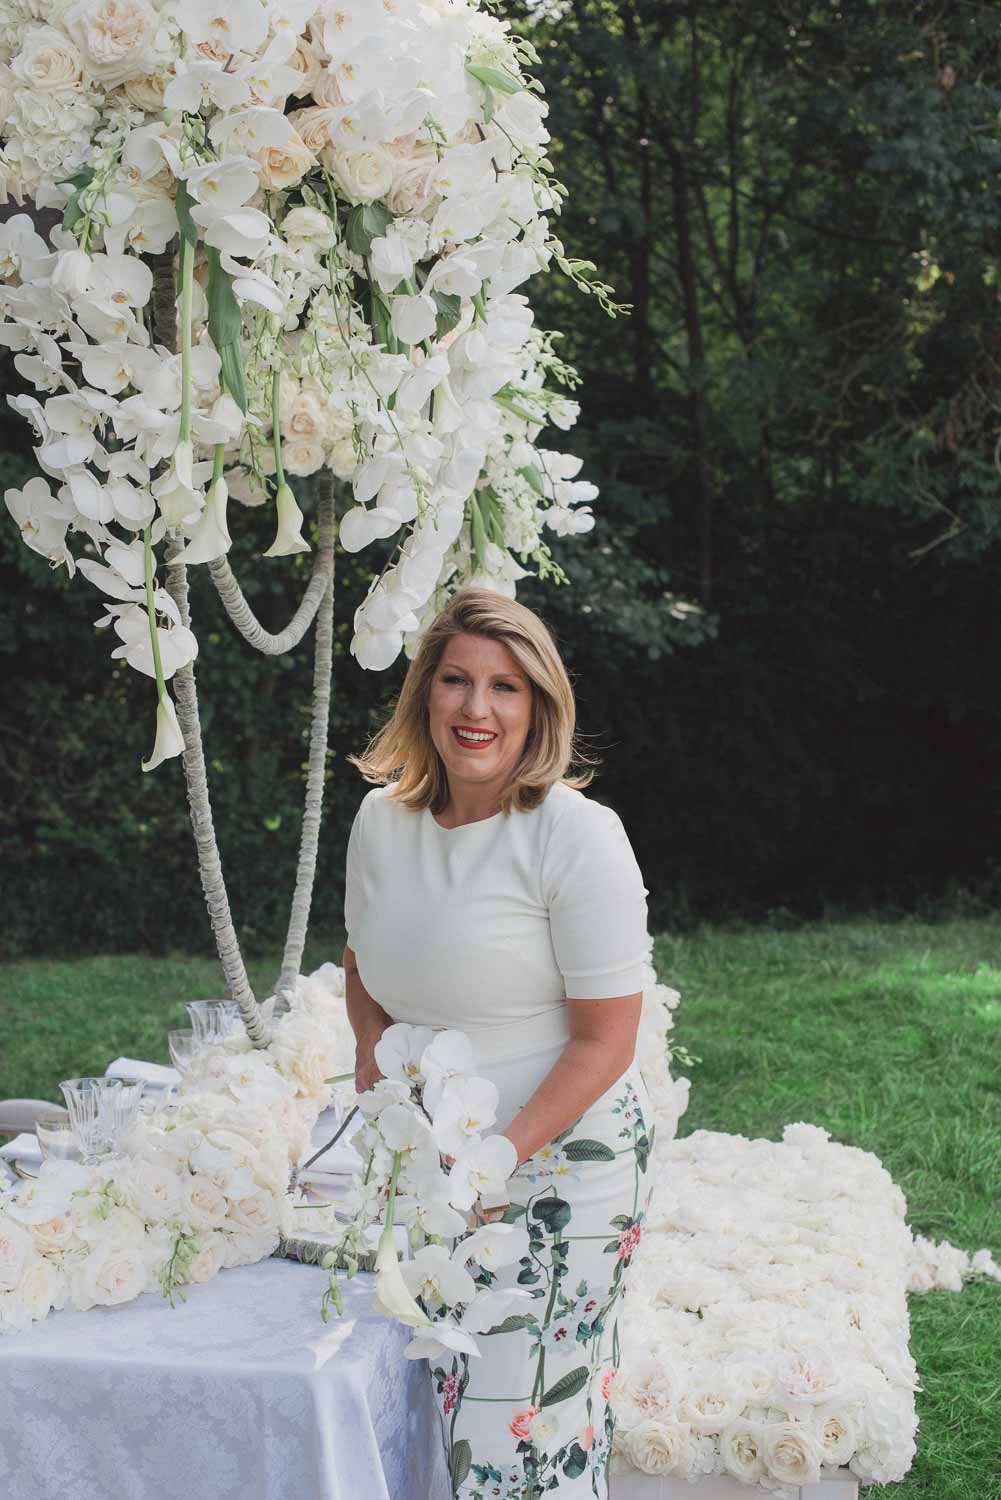 If you are looking to have the WOW factor at your event or wedding, then Paula Rooney luxury floral designer is the florist for you. Click to find out more.